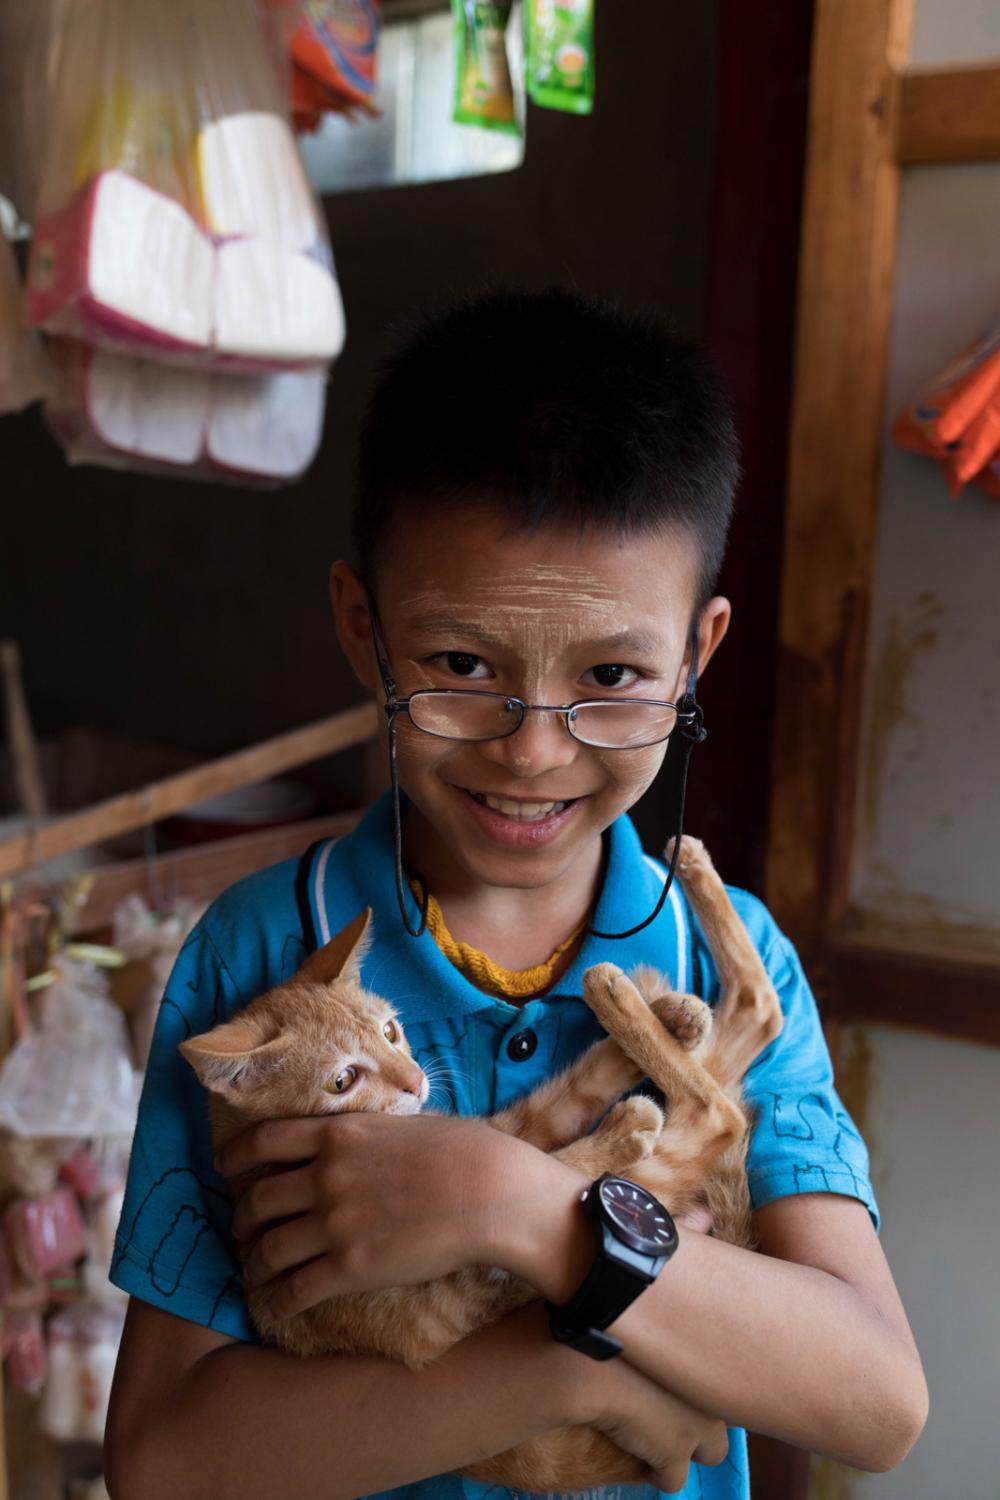 Four Paws Rabies Campaign in Myanmar